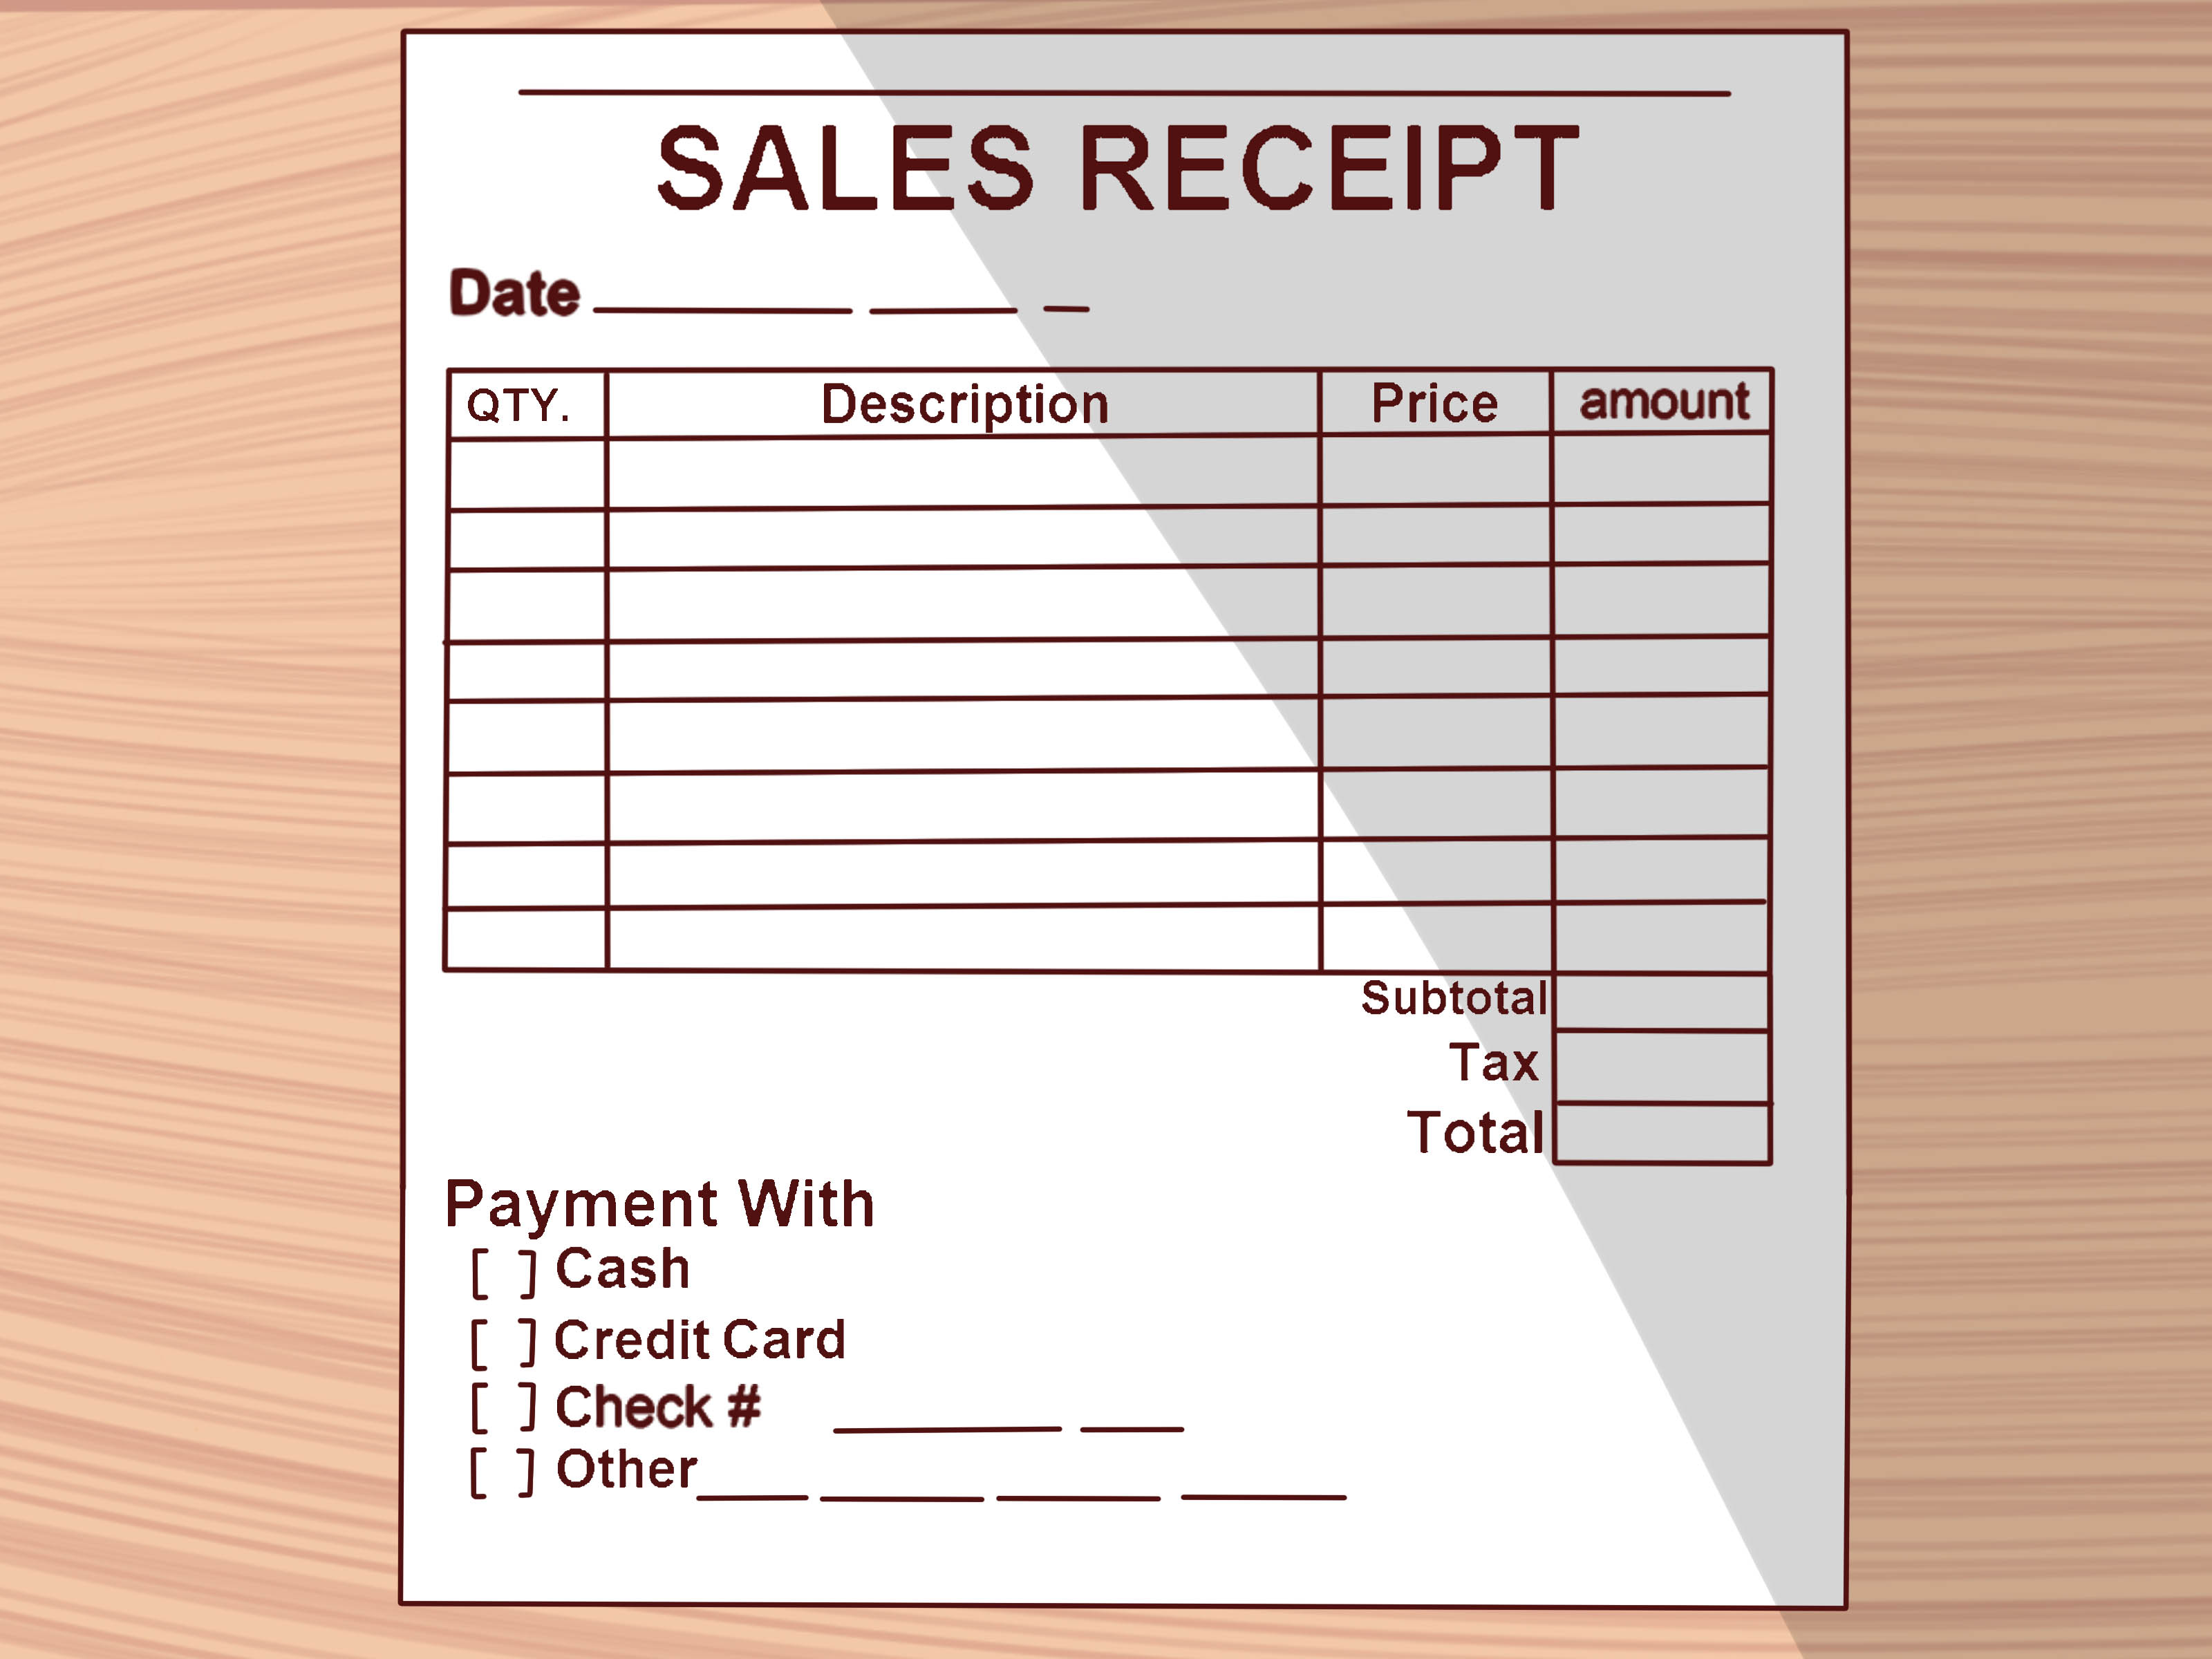 Sample Cash Receipt Template 29+ Free Documents in PDF, Word